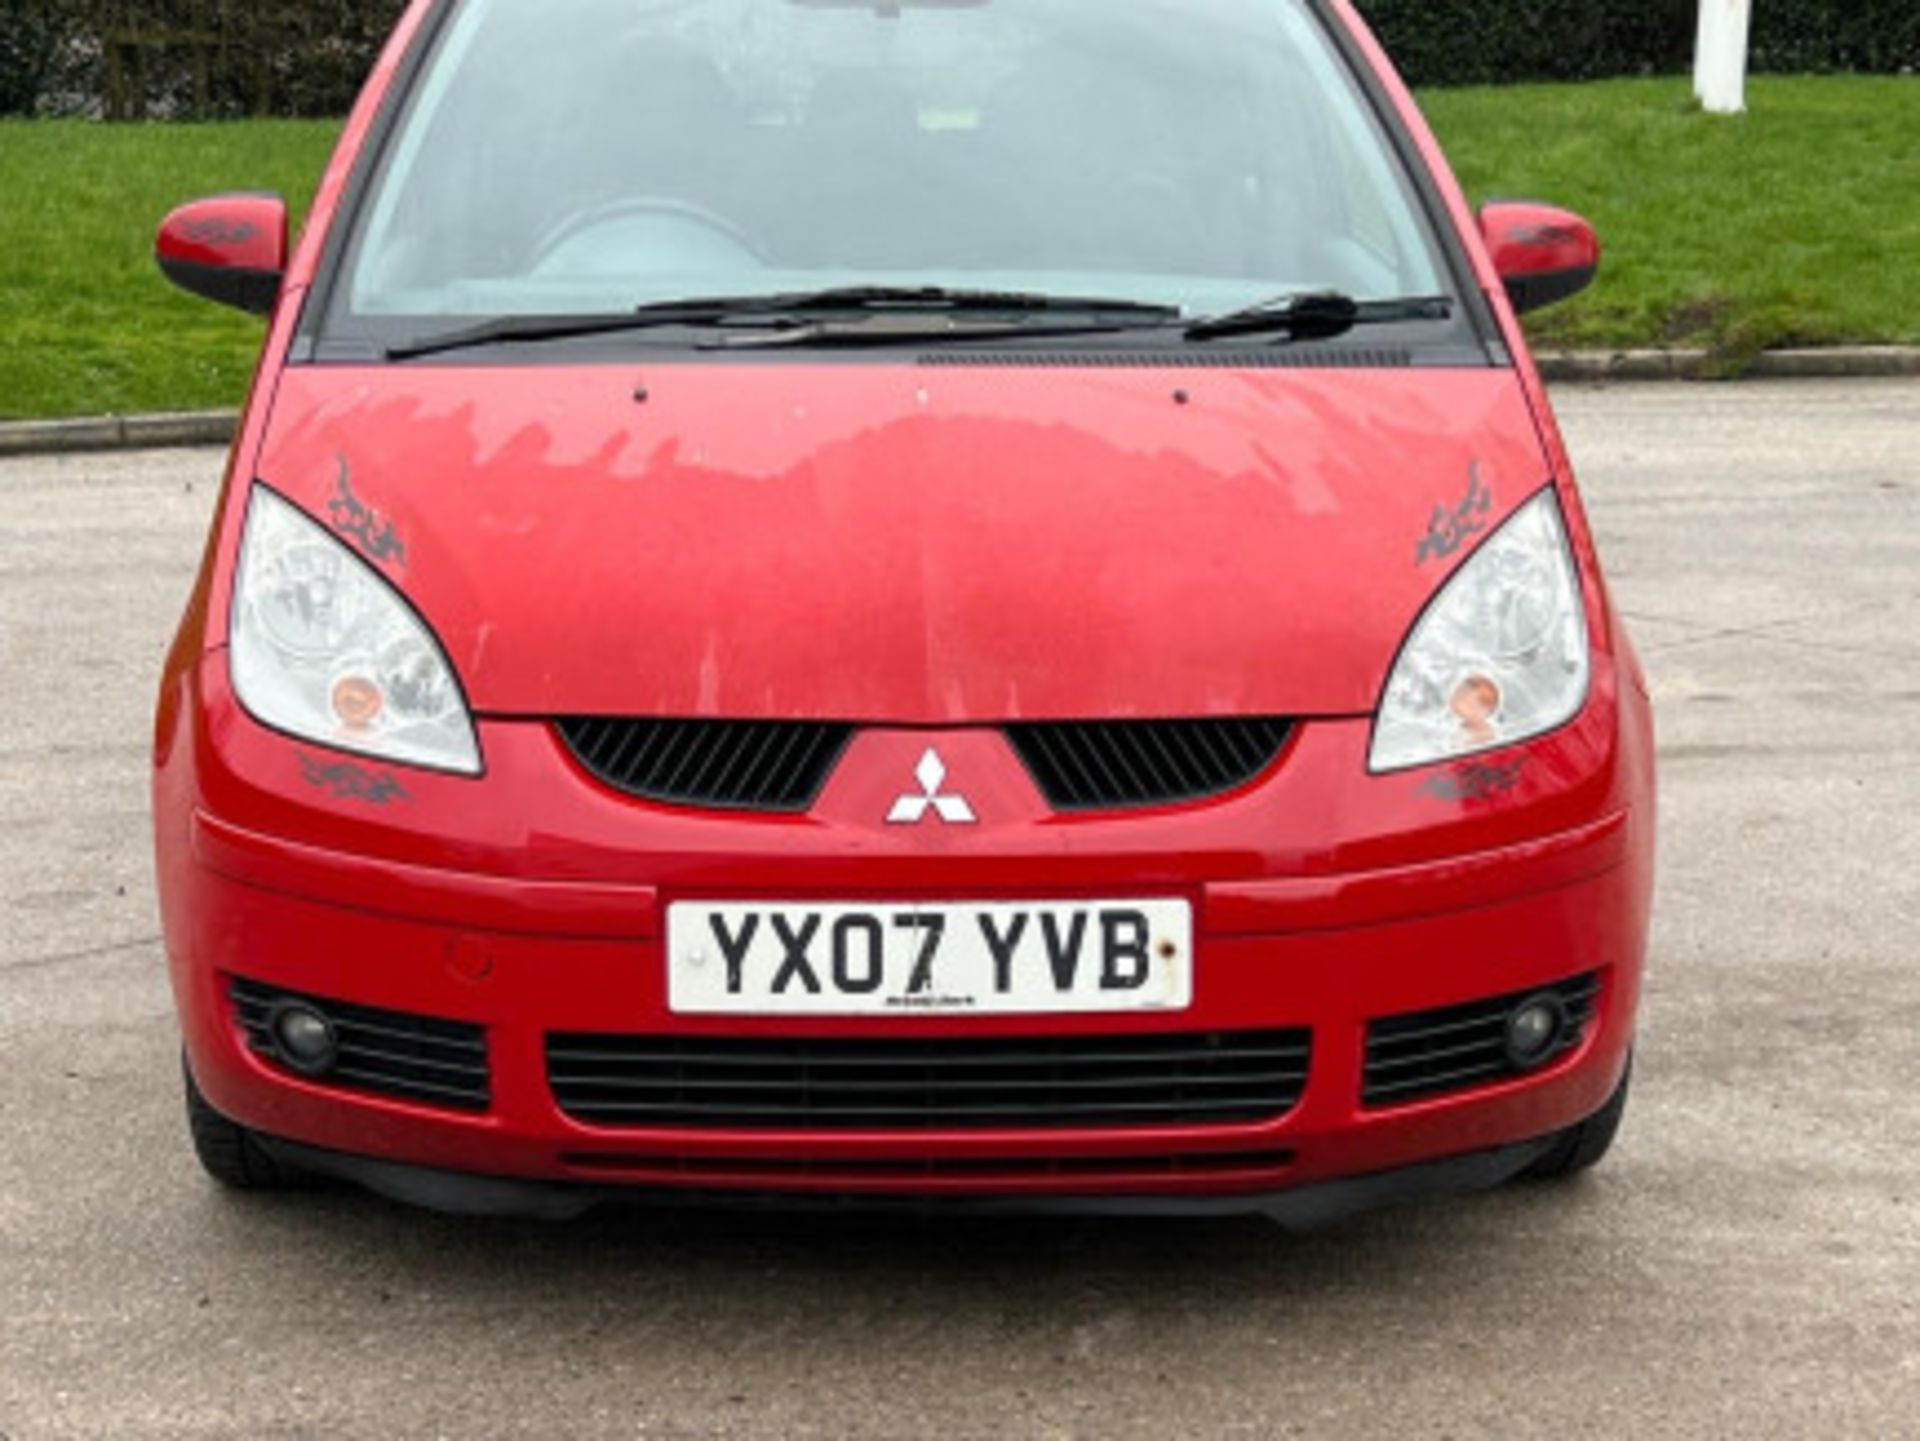 2007 MITSUBISHI COLT 1.5 DI-D DIESEL AUTOMATIC >>--NO VAT ON HAMMER--<< - Image 38 of 191